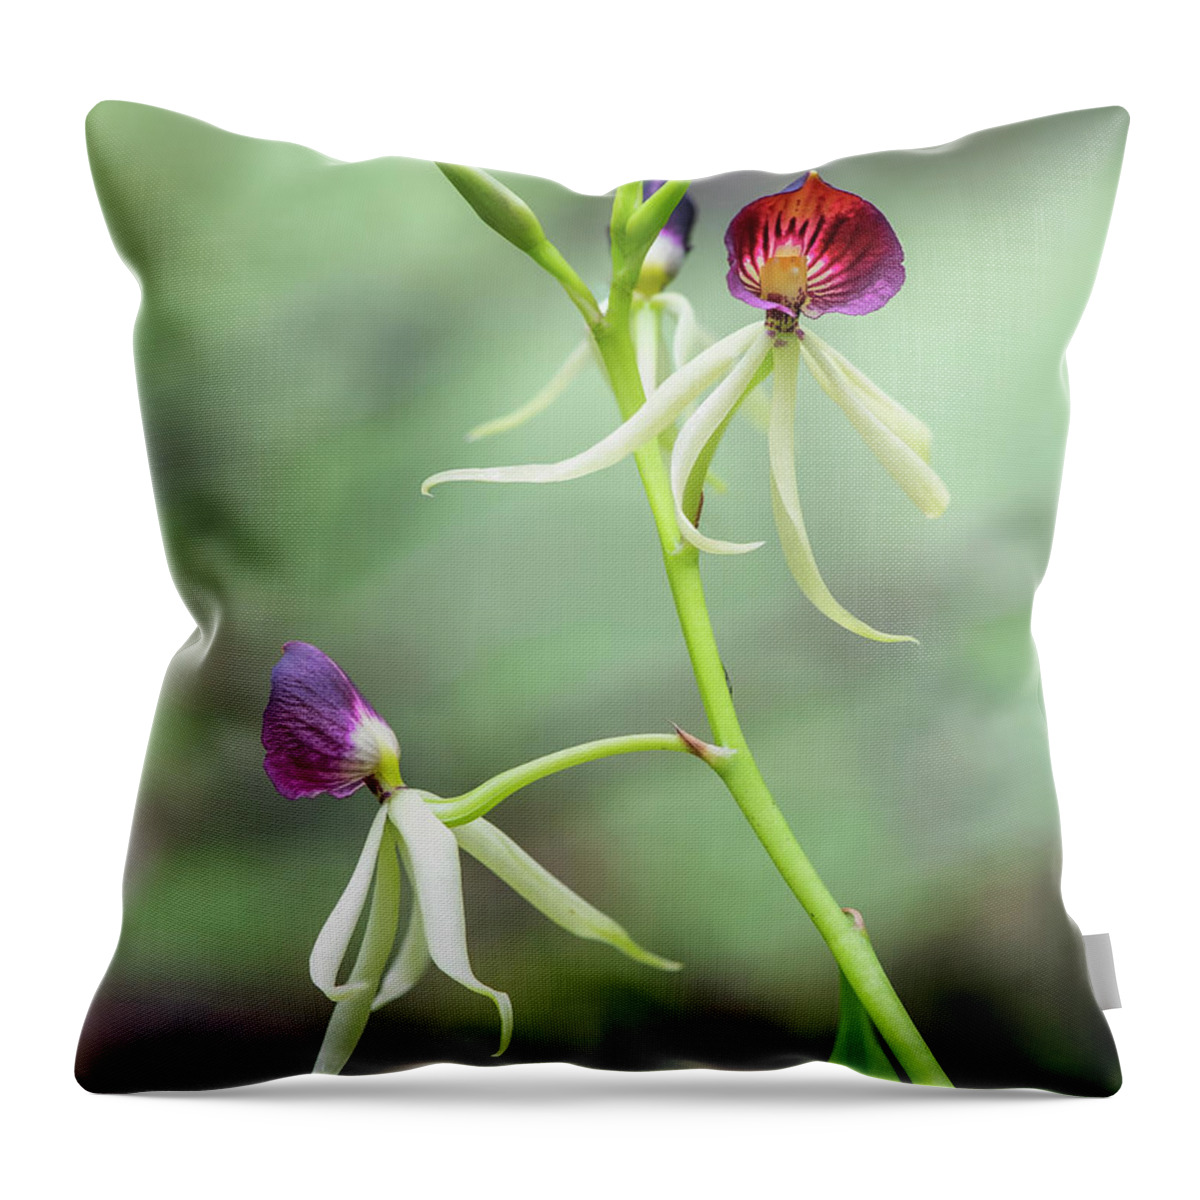 Big Cypress National Preserve Throw Pillow featuring the photograph Clamshell Orchid 1 by Rudy Wilms